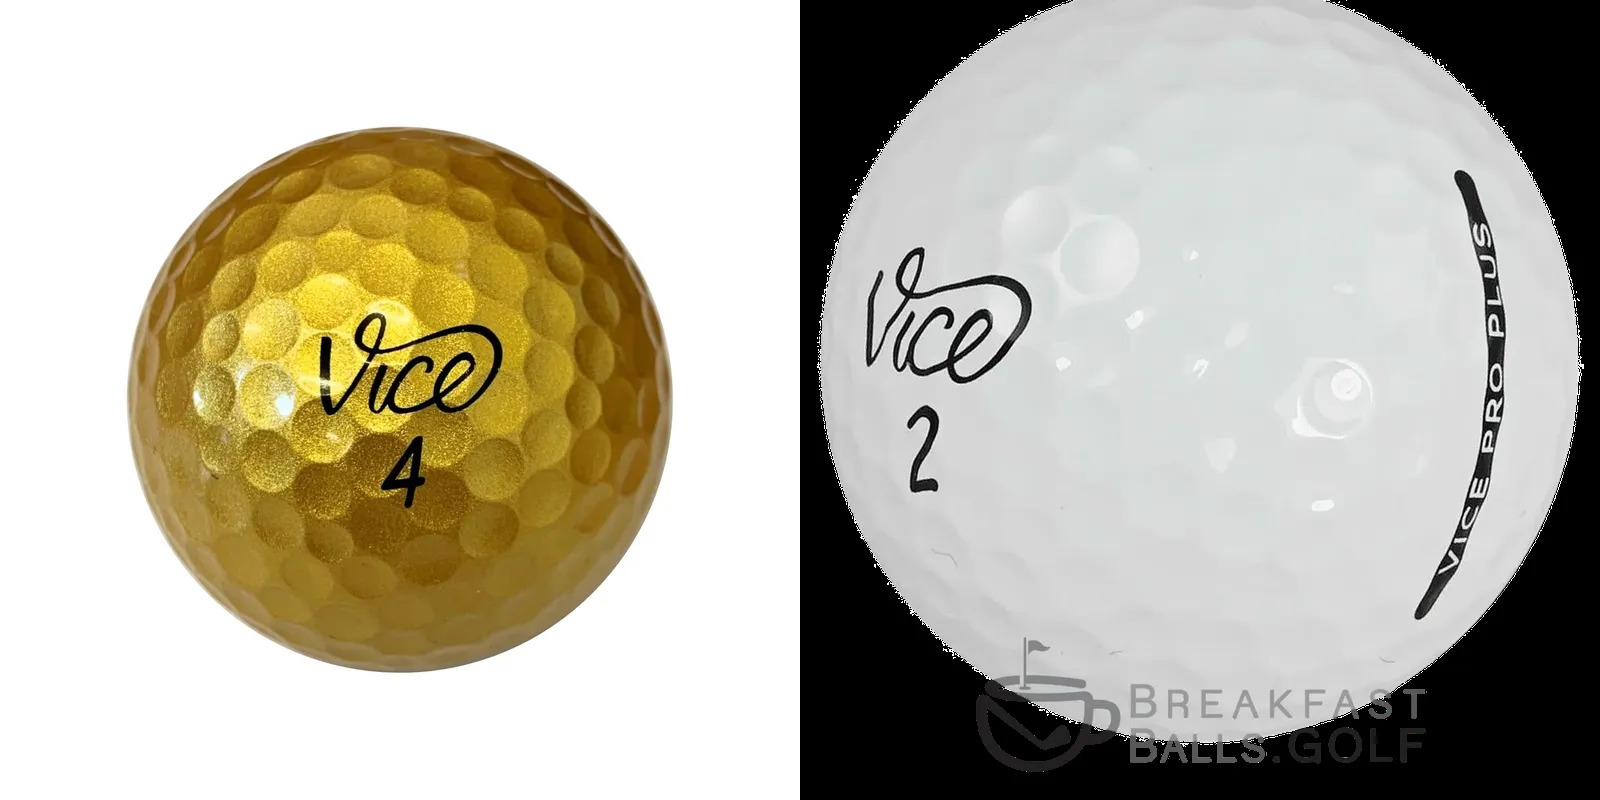 The introduction of Vice Pro Plus Golf Ball